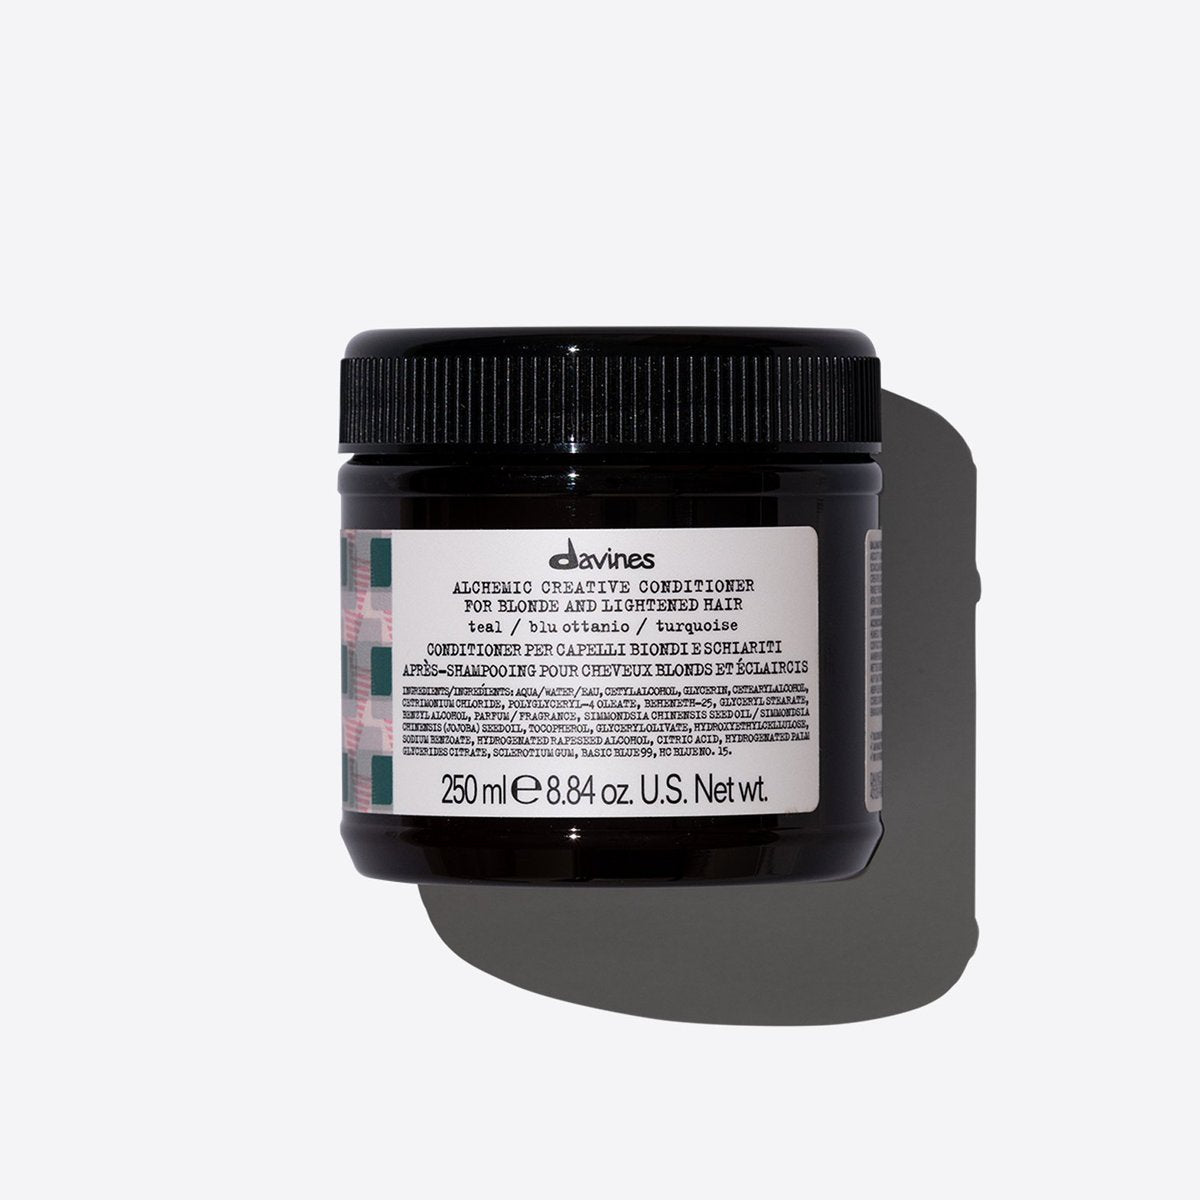 Davines Alchemic Creative Conditioner - Teal ( For light hair)